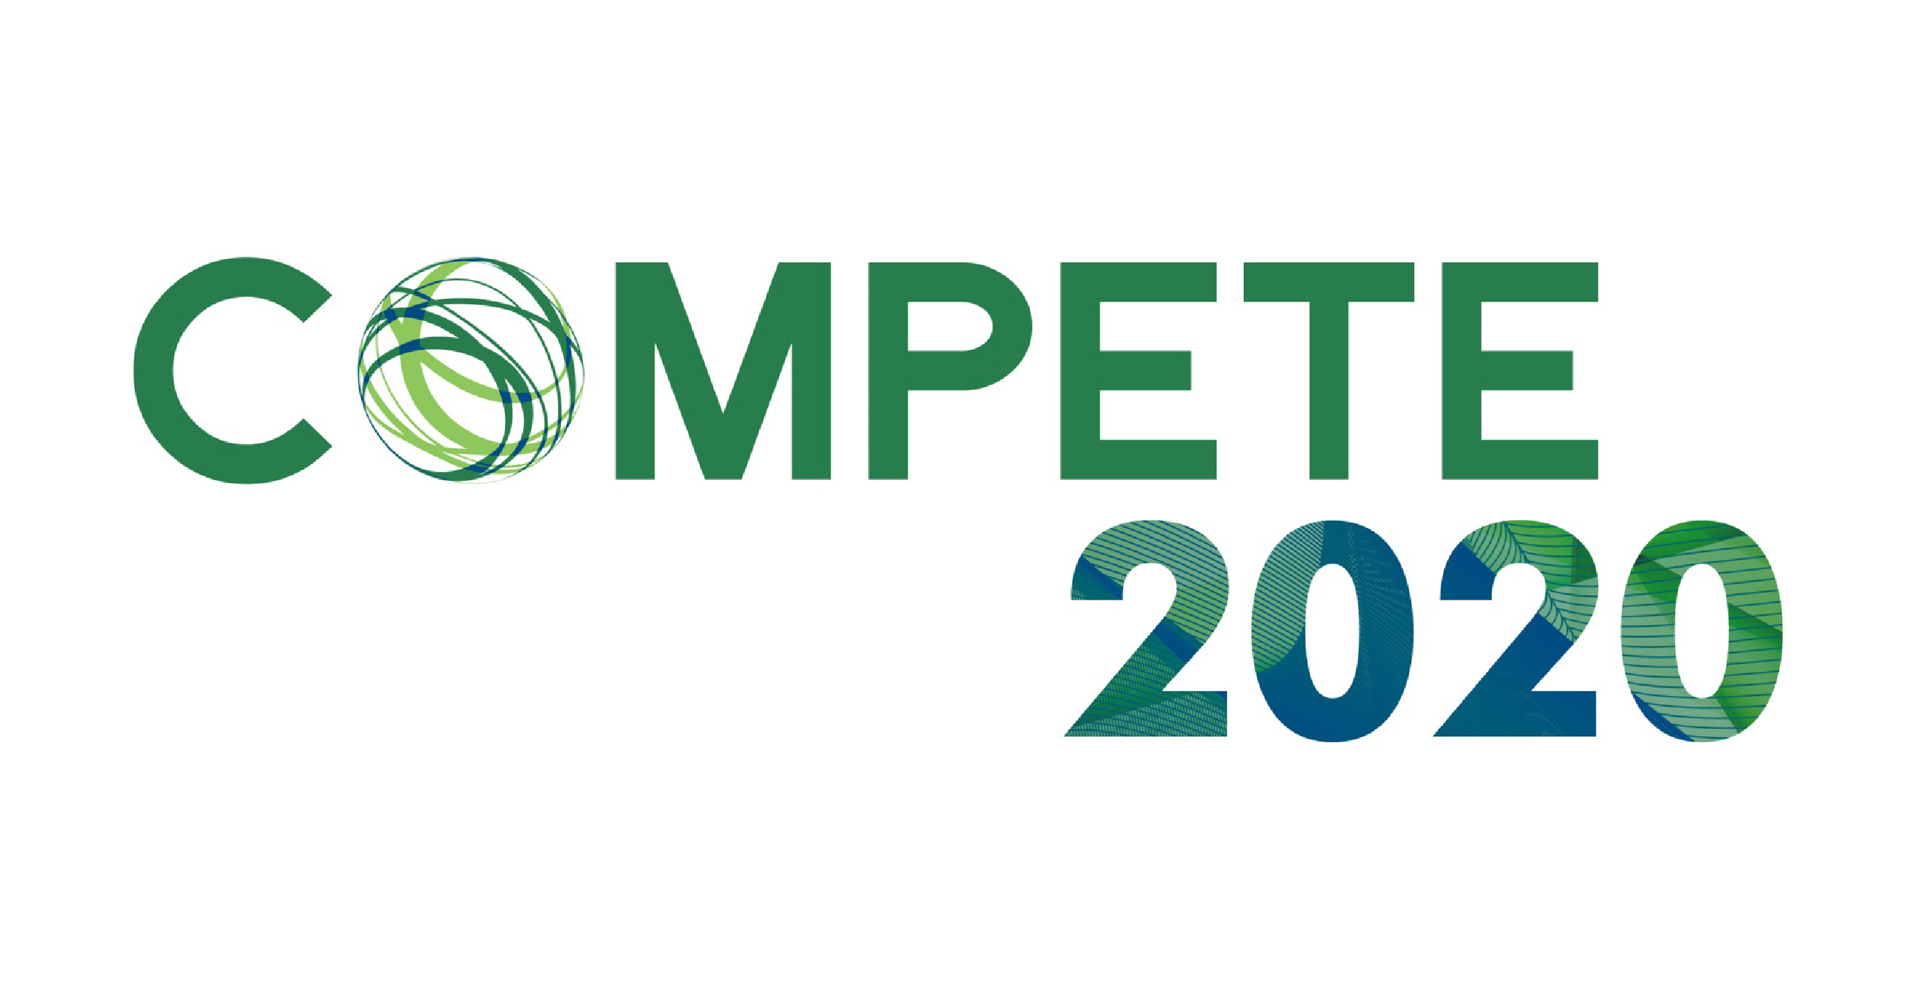 Competitions 2020. Compete. GEONEXT.